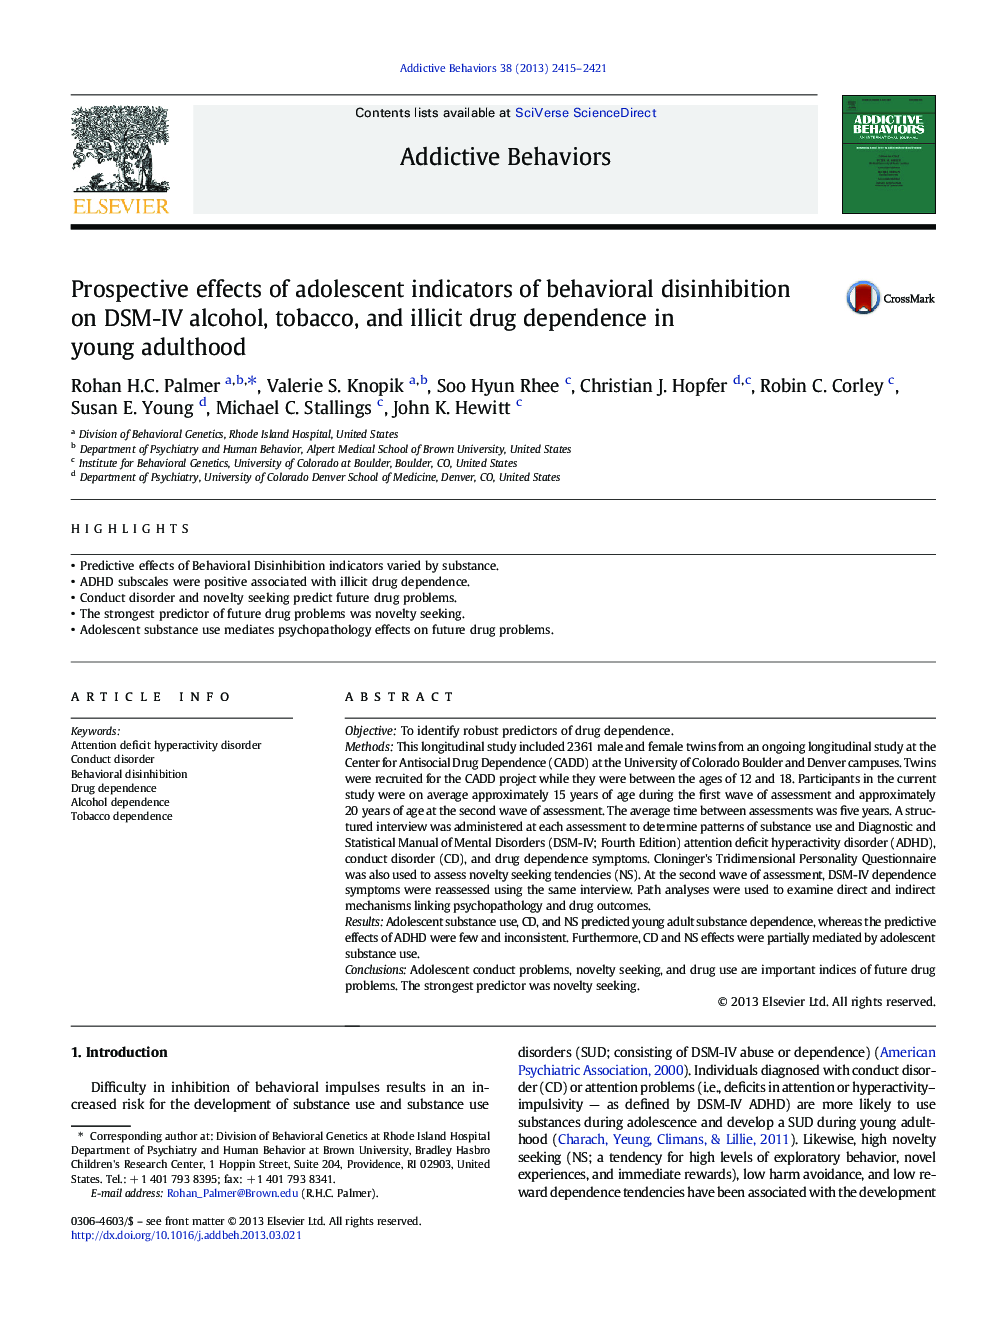 Prospective effects of adolescent indicators of behavioral disinhibition on DSM-IV alcohol, tobacco, and illicit drug dependence in young adulthood